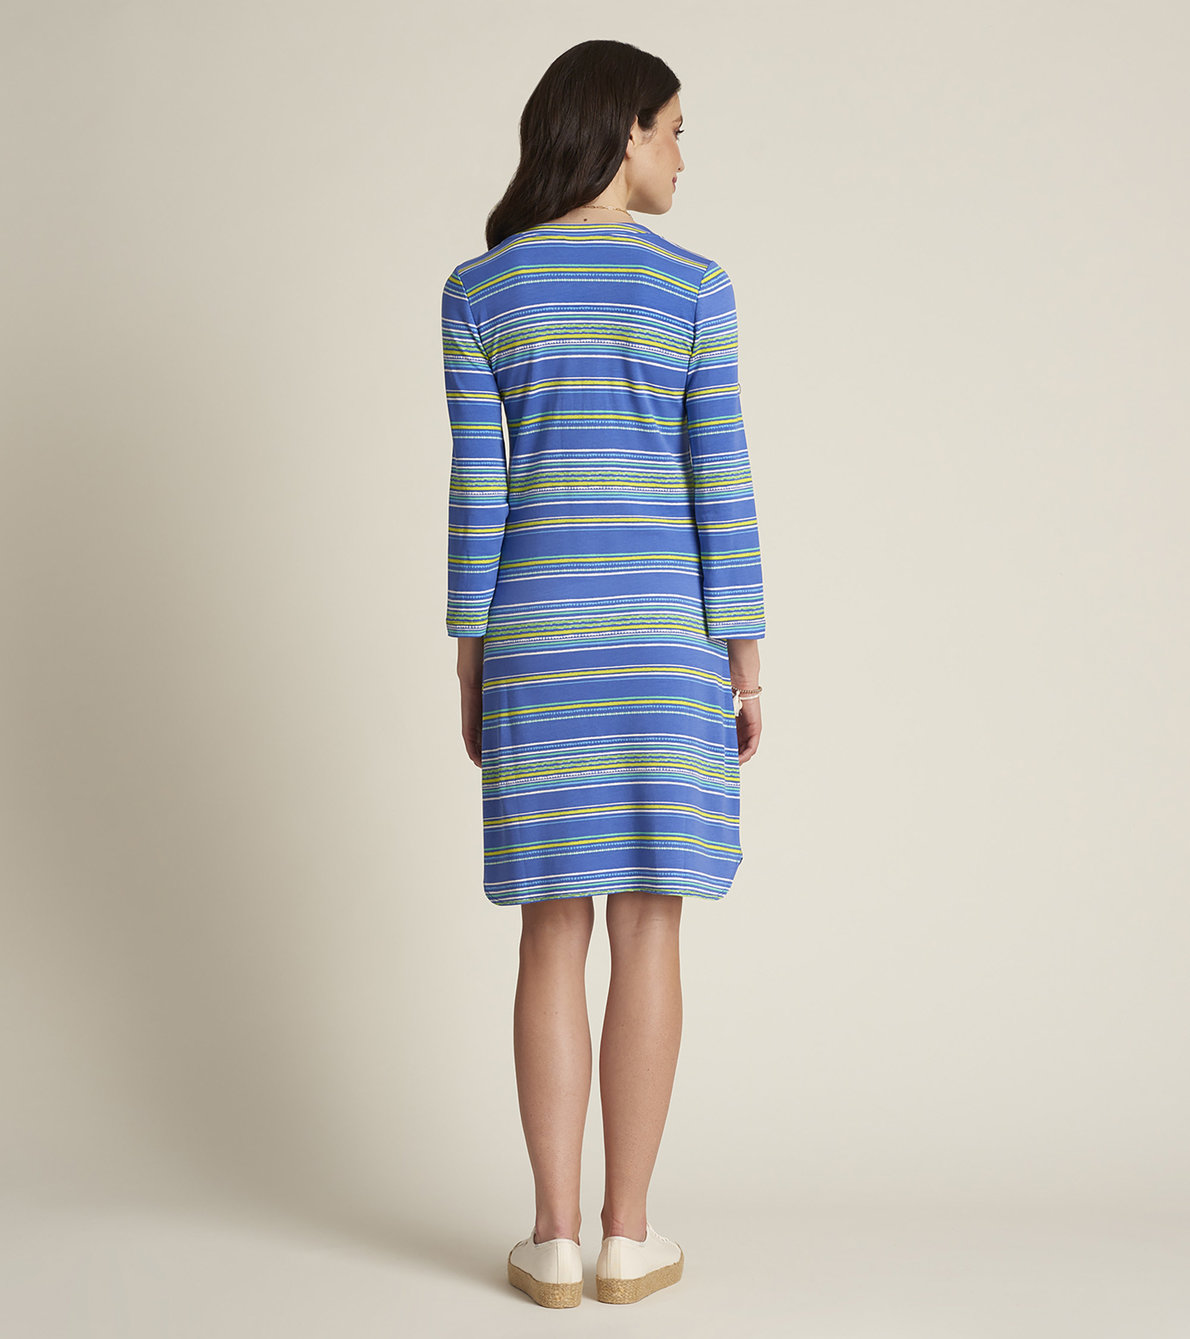 View larger image of Ashley Dress - Tropical Stripes